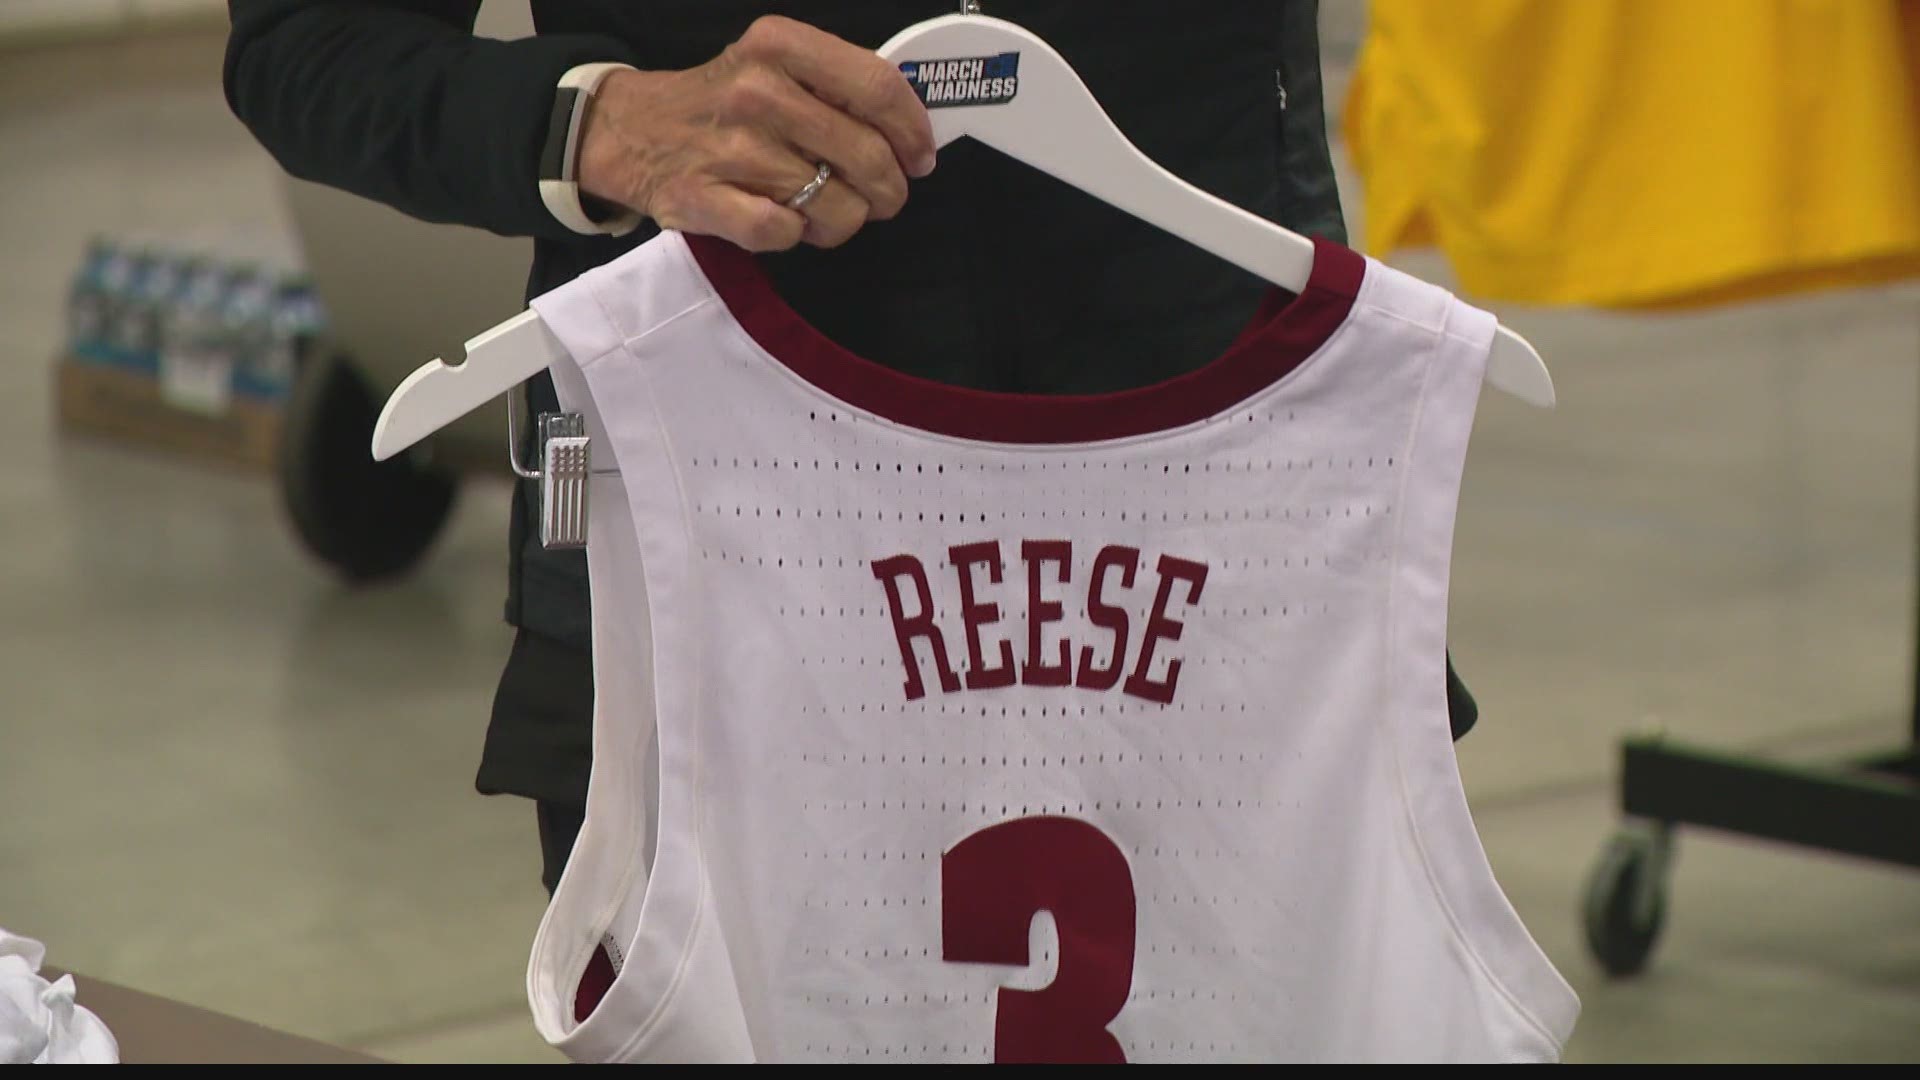 Mary Milz gives us an inside look at the volunteers helping make sure the March Madness teams have clean uniforms to compete in.